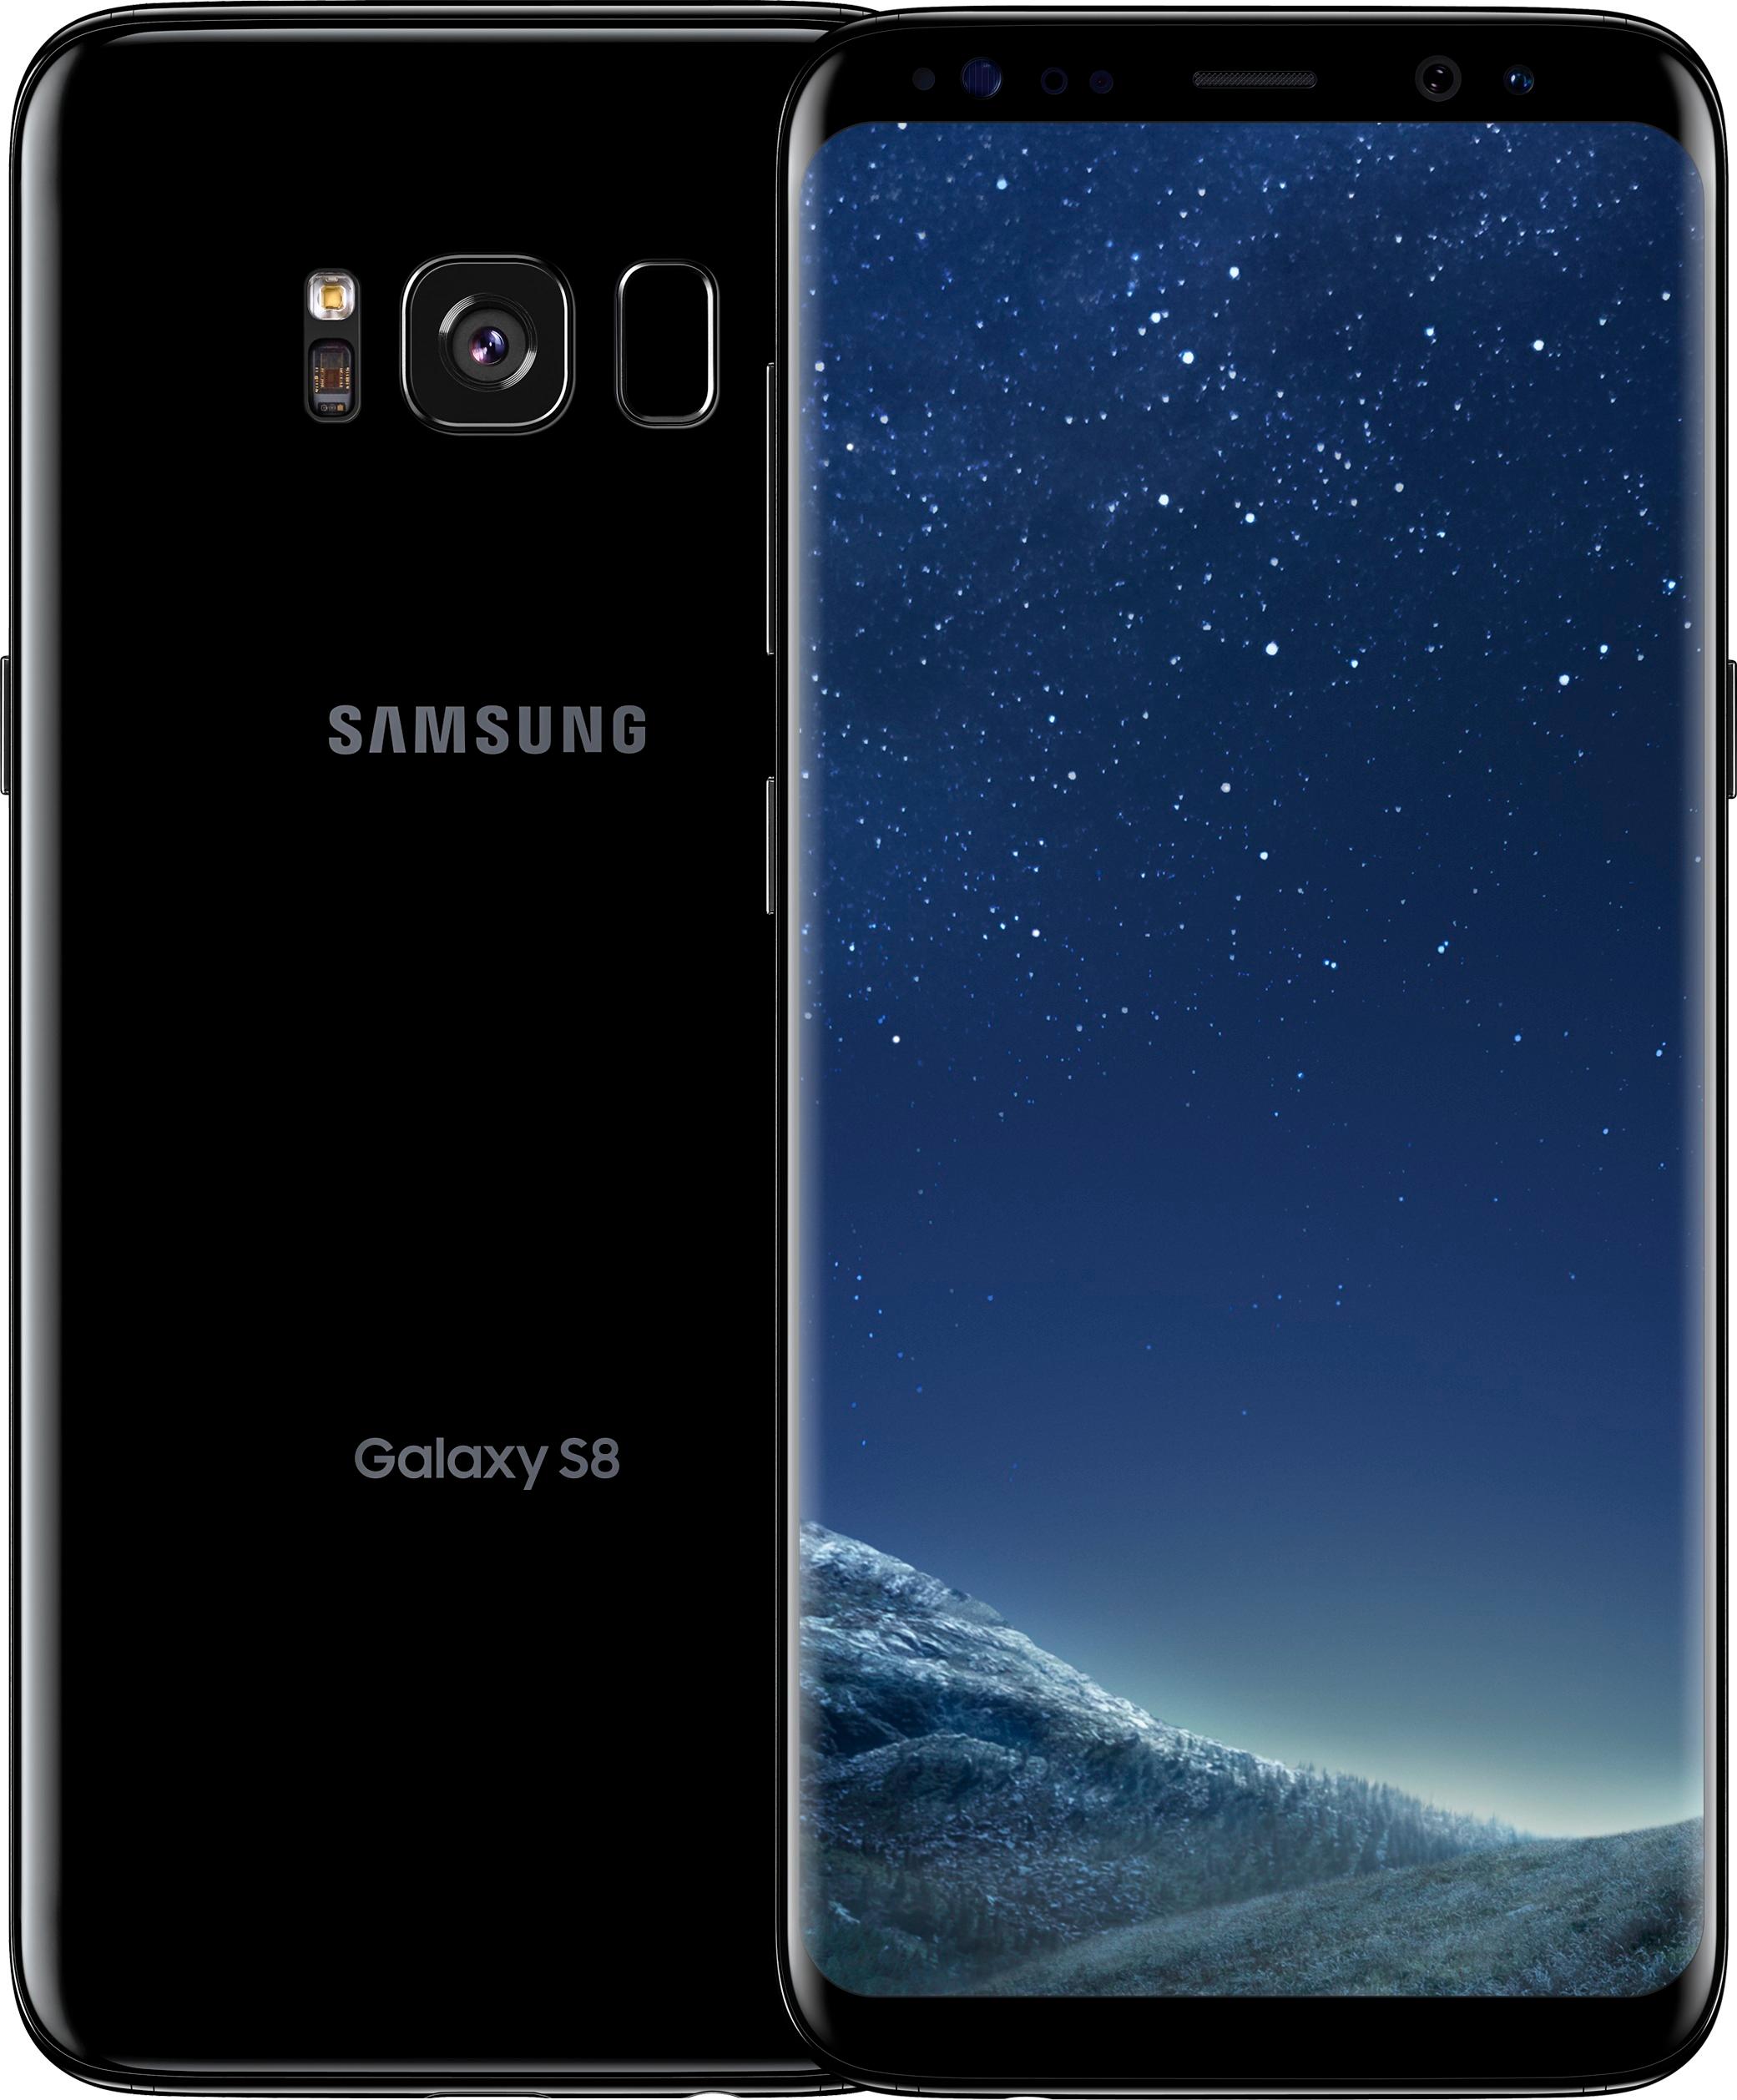 Mighty Applied Senate Best Buy: Samsung Galaxy S8 64GB Coral Blue (AT&T) 6141B